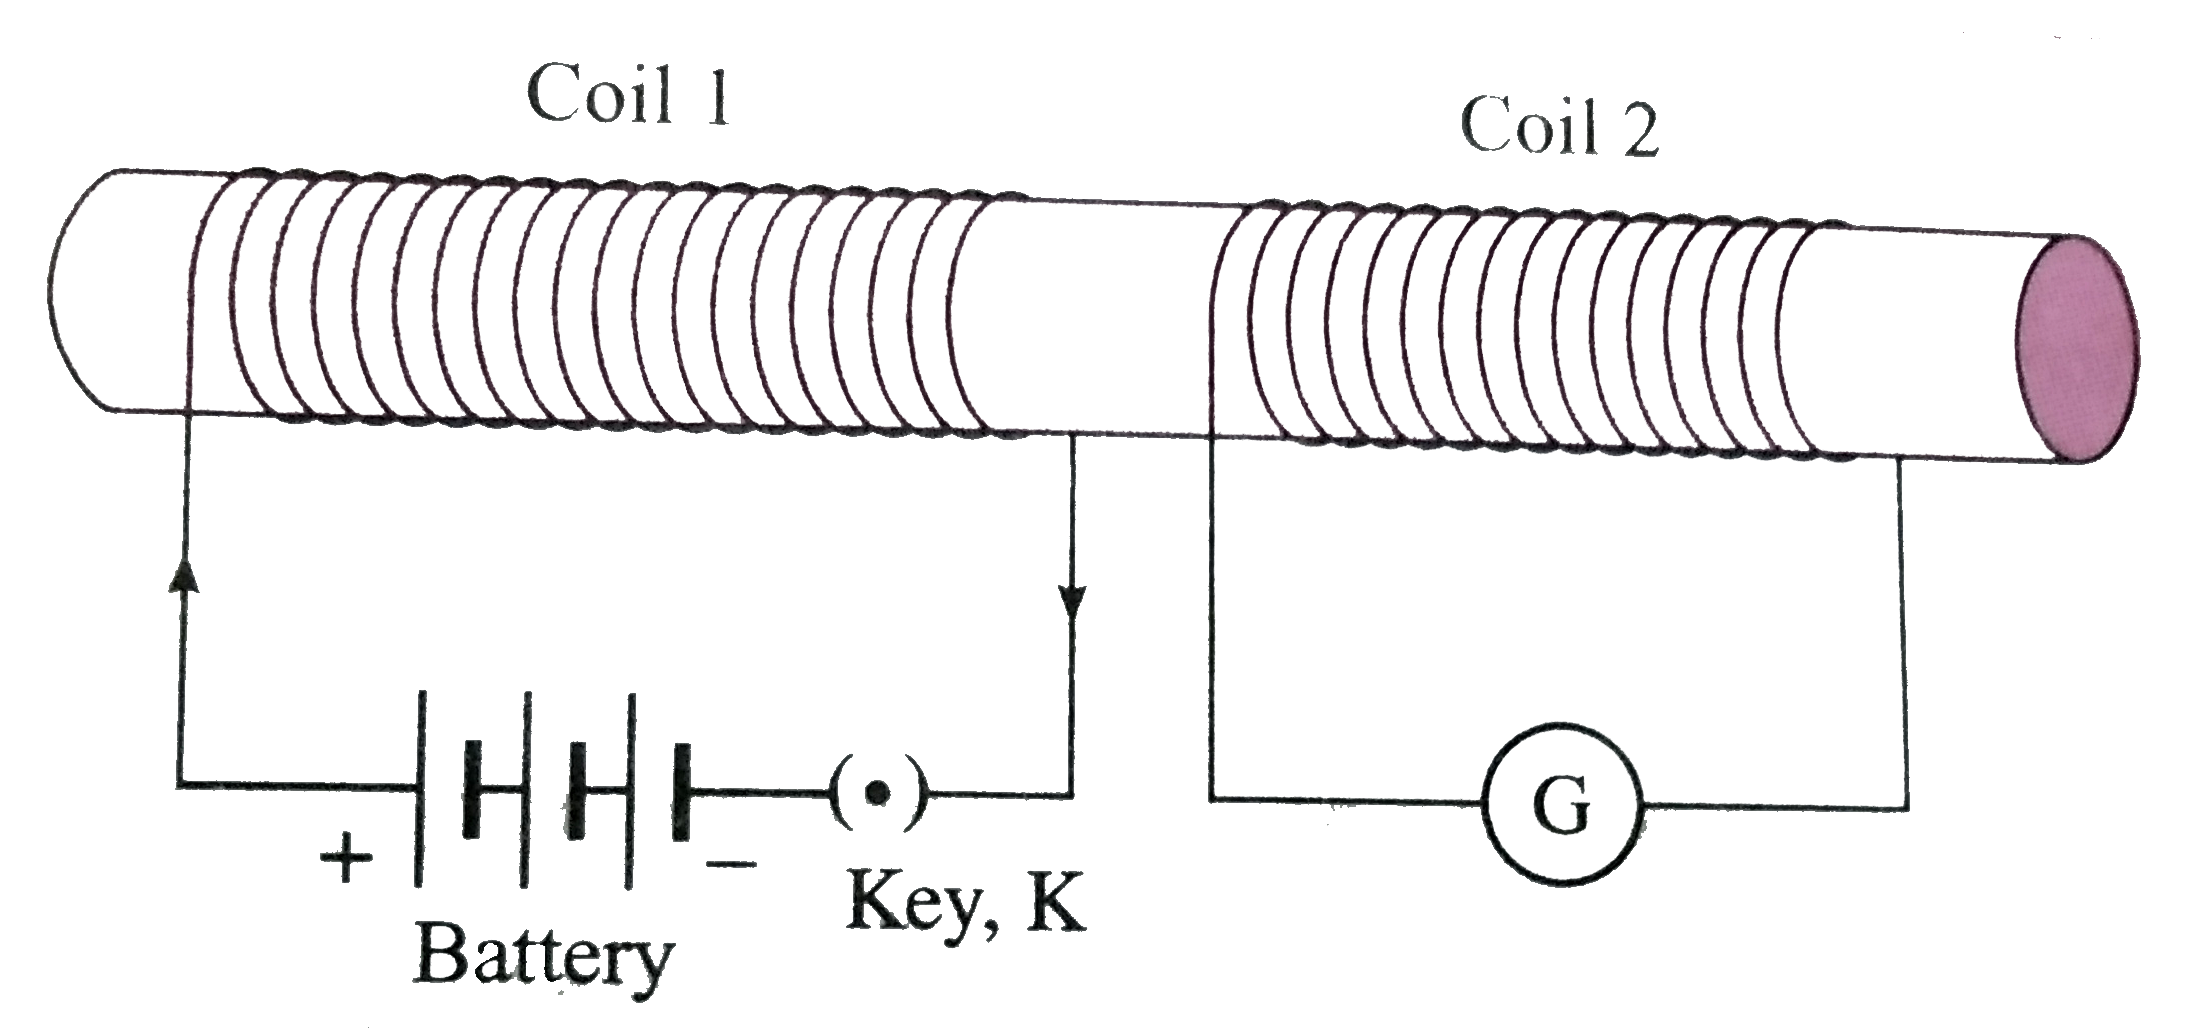 Take two coils of about 50 turns. Insert them over a nonconducting cylindrical roll as shown in Fig. 4.23. (A thick paper roll can be used.) Connect coil 1 to a battery with a plug key K. Connect coil 2 to a galvanometer G. (1) Plug the key and observe the deflection in the galvanometer. (2) Unplug the key and again observe the deflection. Note your observations. What conclusions do you draw from these observations?